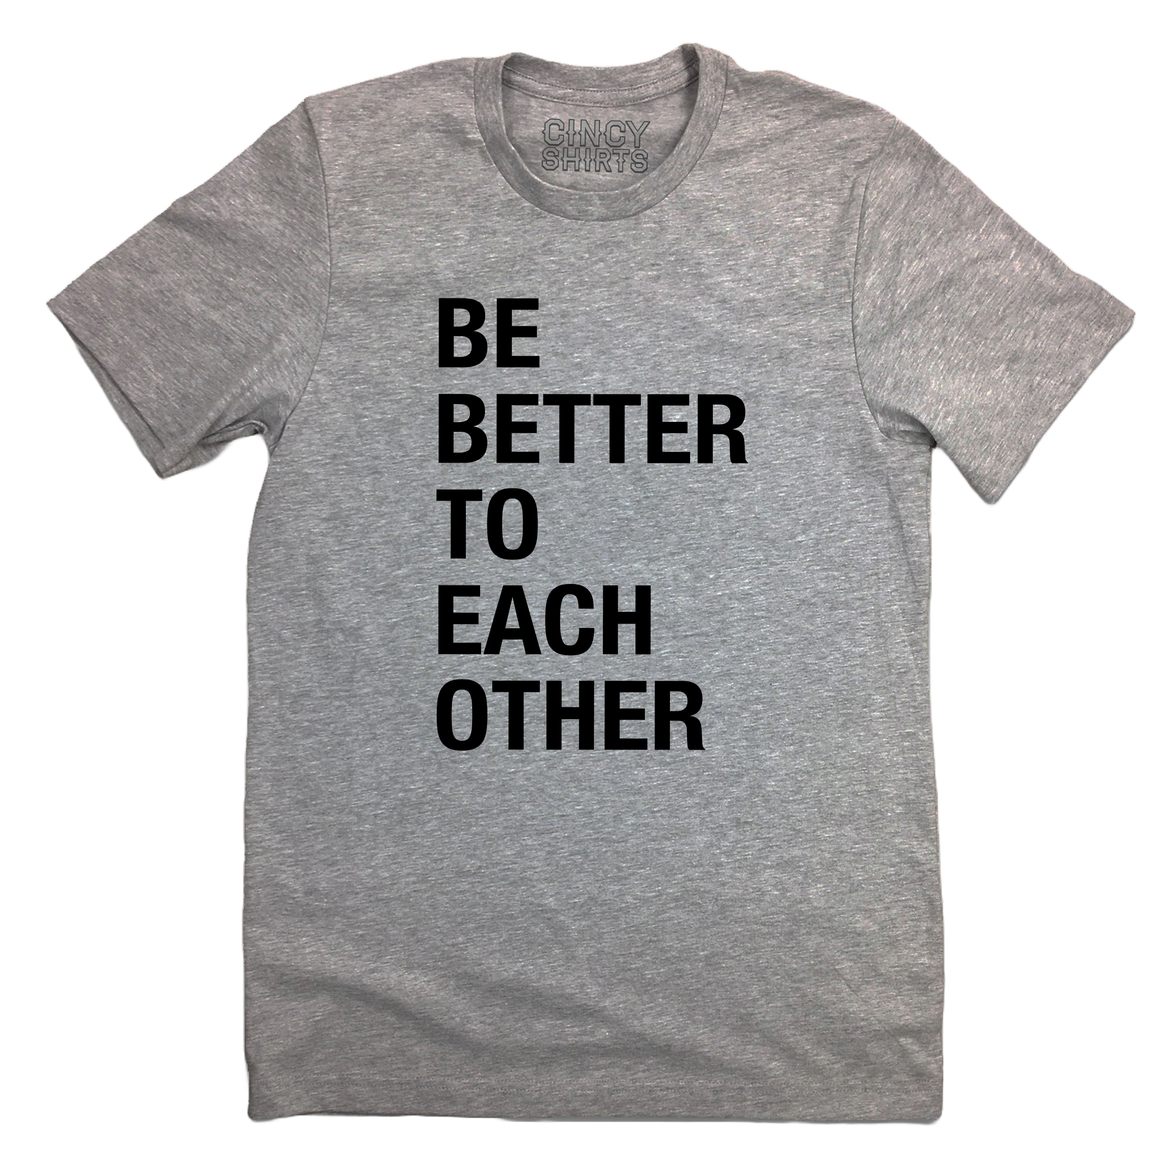 Be Better To Each Other - Cincy Shirts